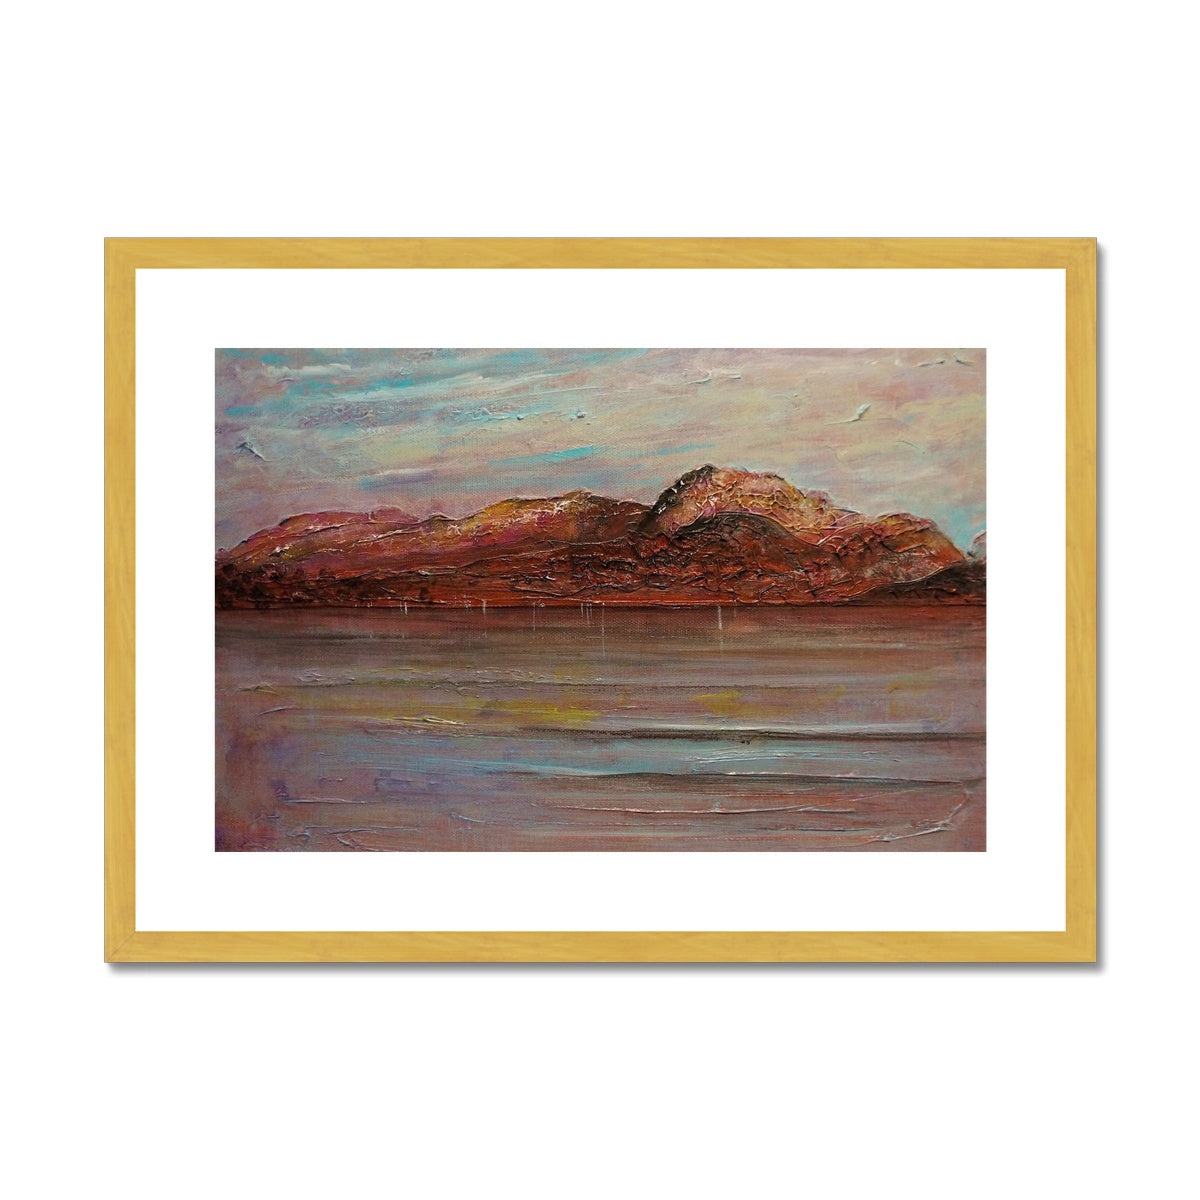 Ben Nevis Painting | Antique Framed & Mounted Prints From Scotland-Fine art-Scottish Lochs & Mountains Art Gallery-A2 Landscape-Gold Frame-Paintings, Prints, Homeware, Art Gifts From Scotland By Scottish Artist Kevin Hunter